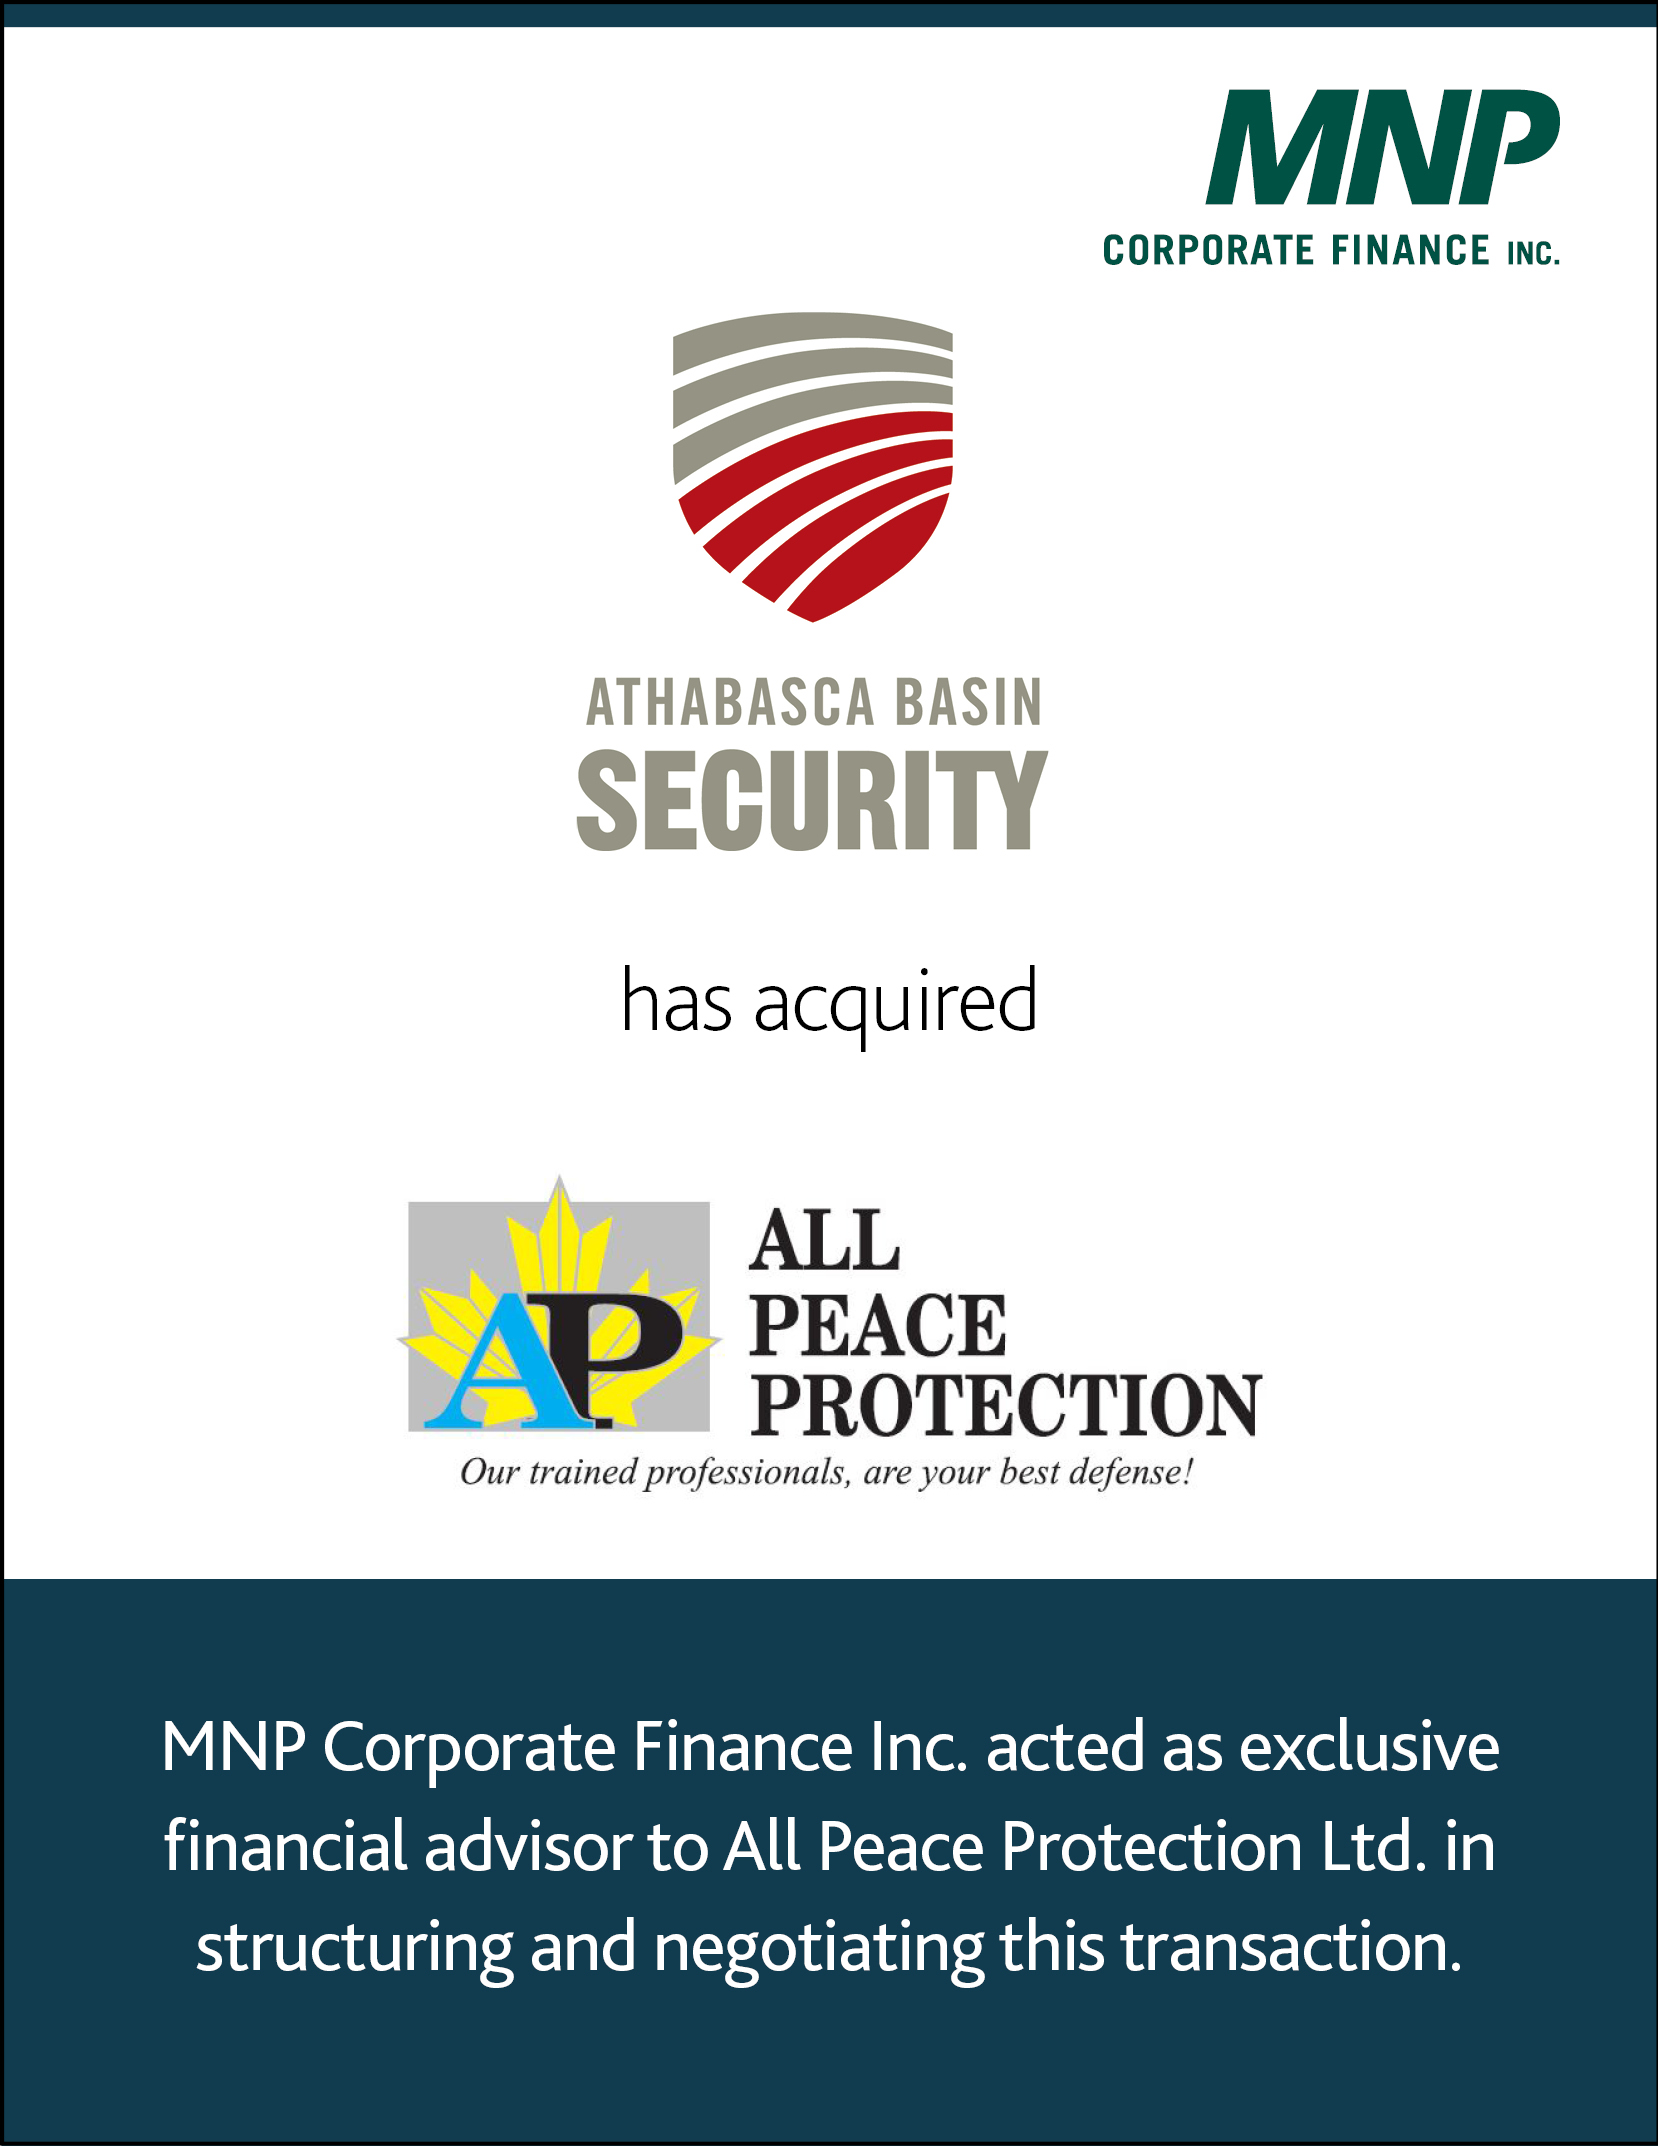 Athabasca Basin Security Limited Partnership has acquired All Peace Protection Ltd.